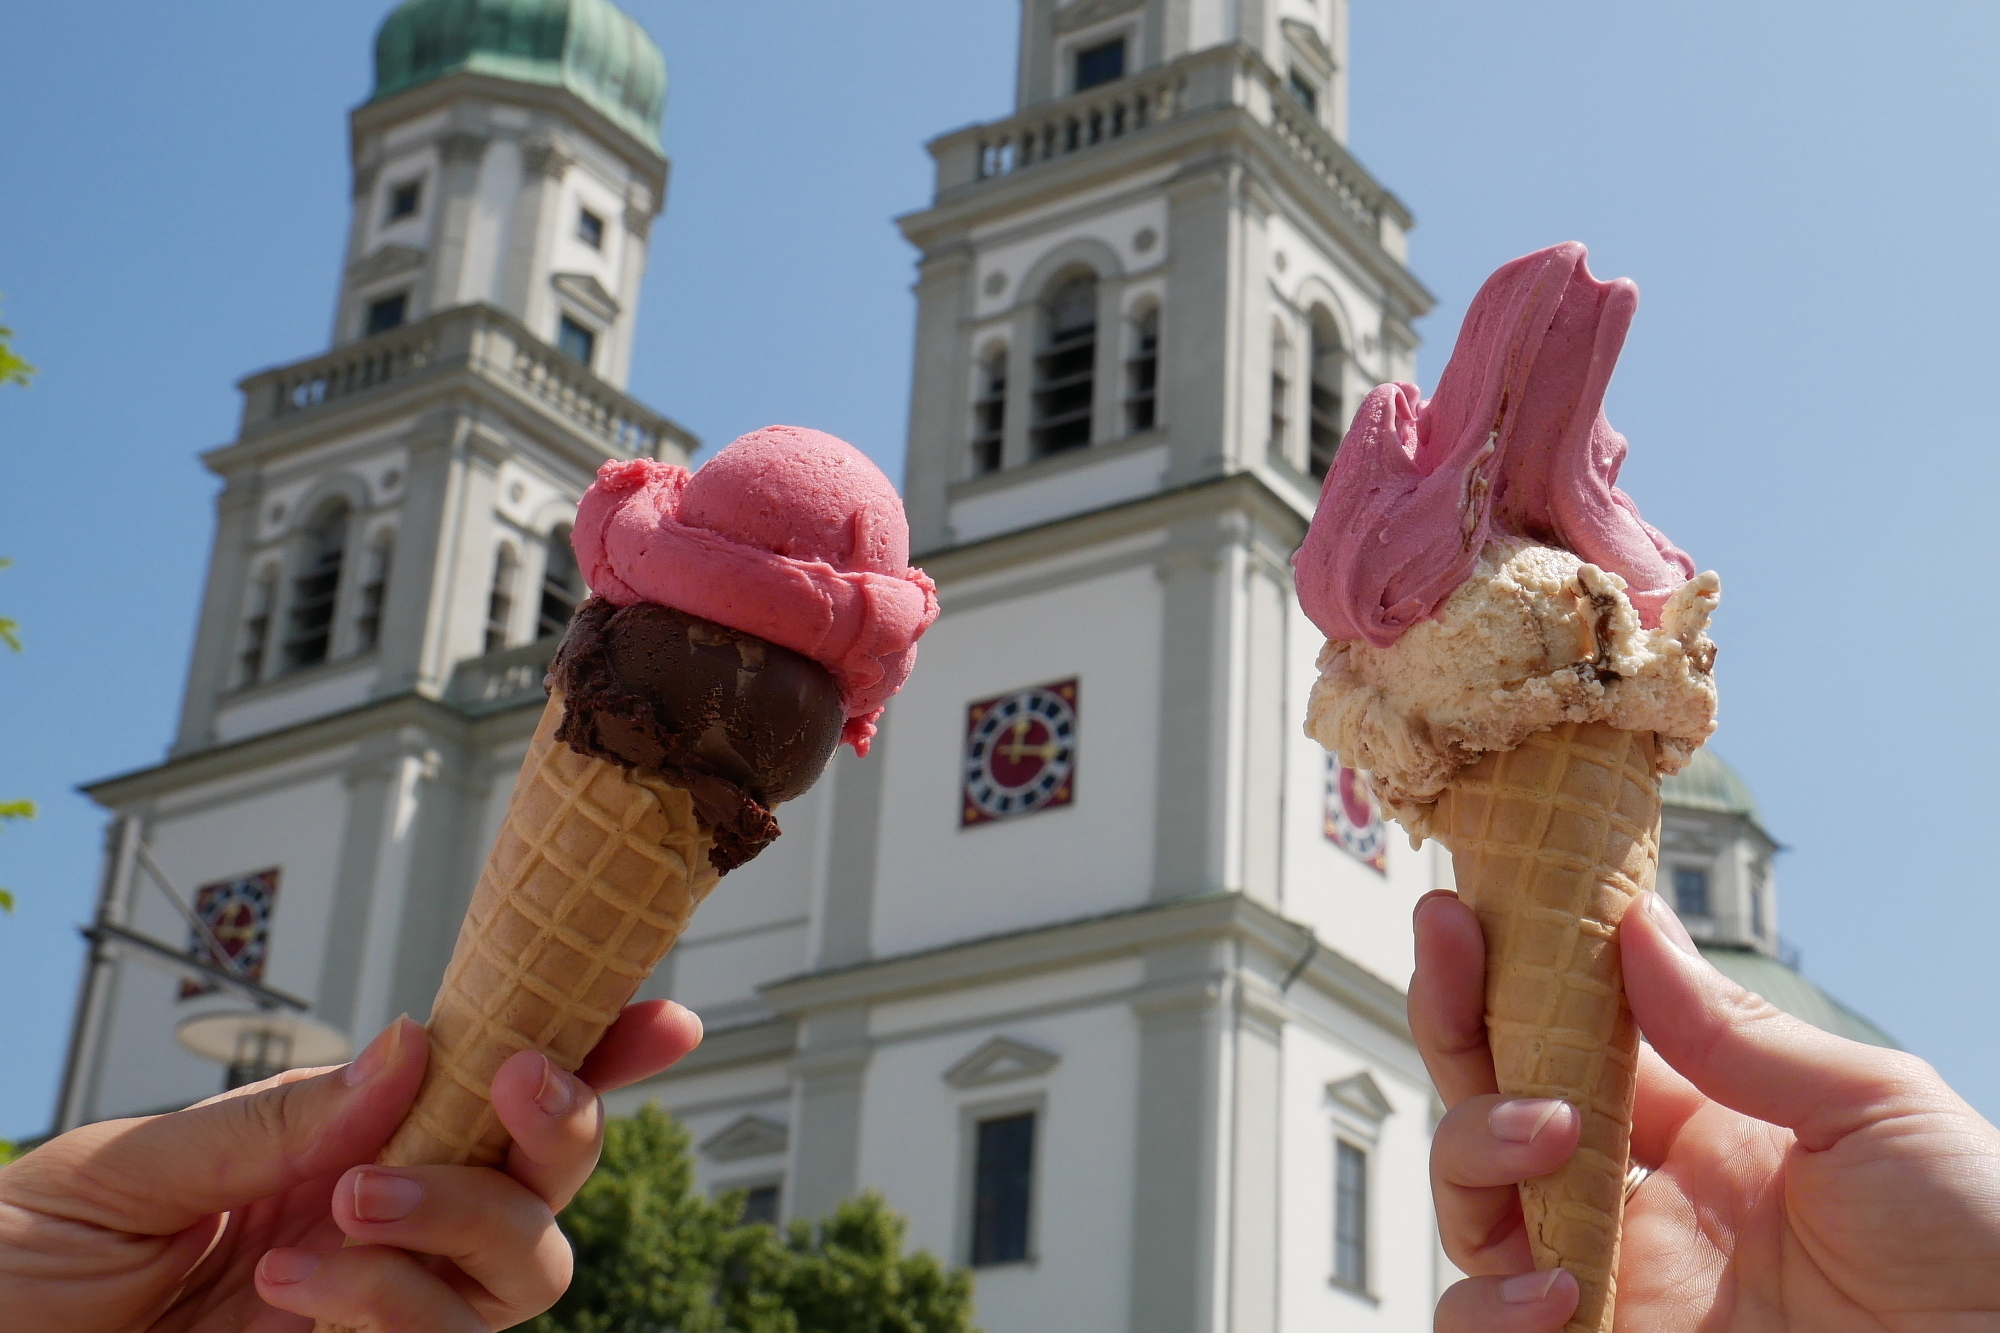 Ice cream in a cone in front of Basilica of St Lorenz